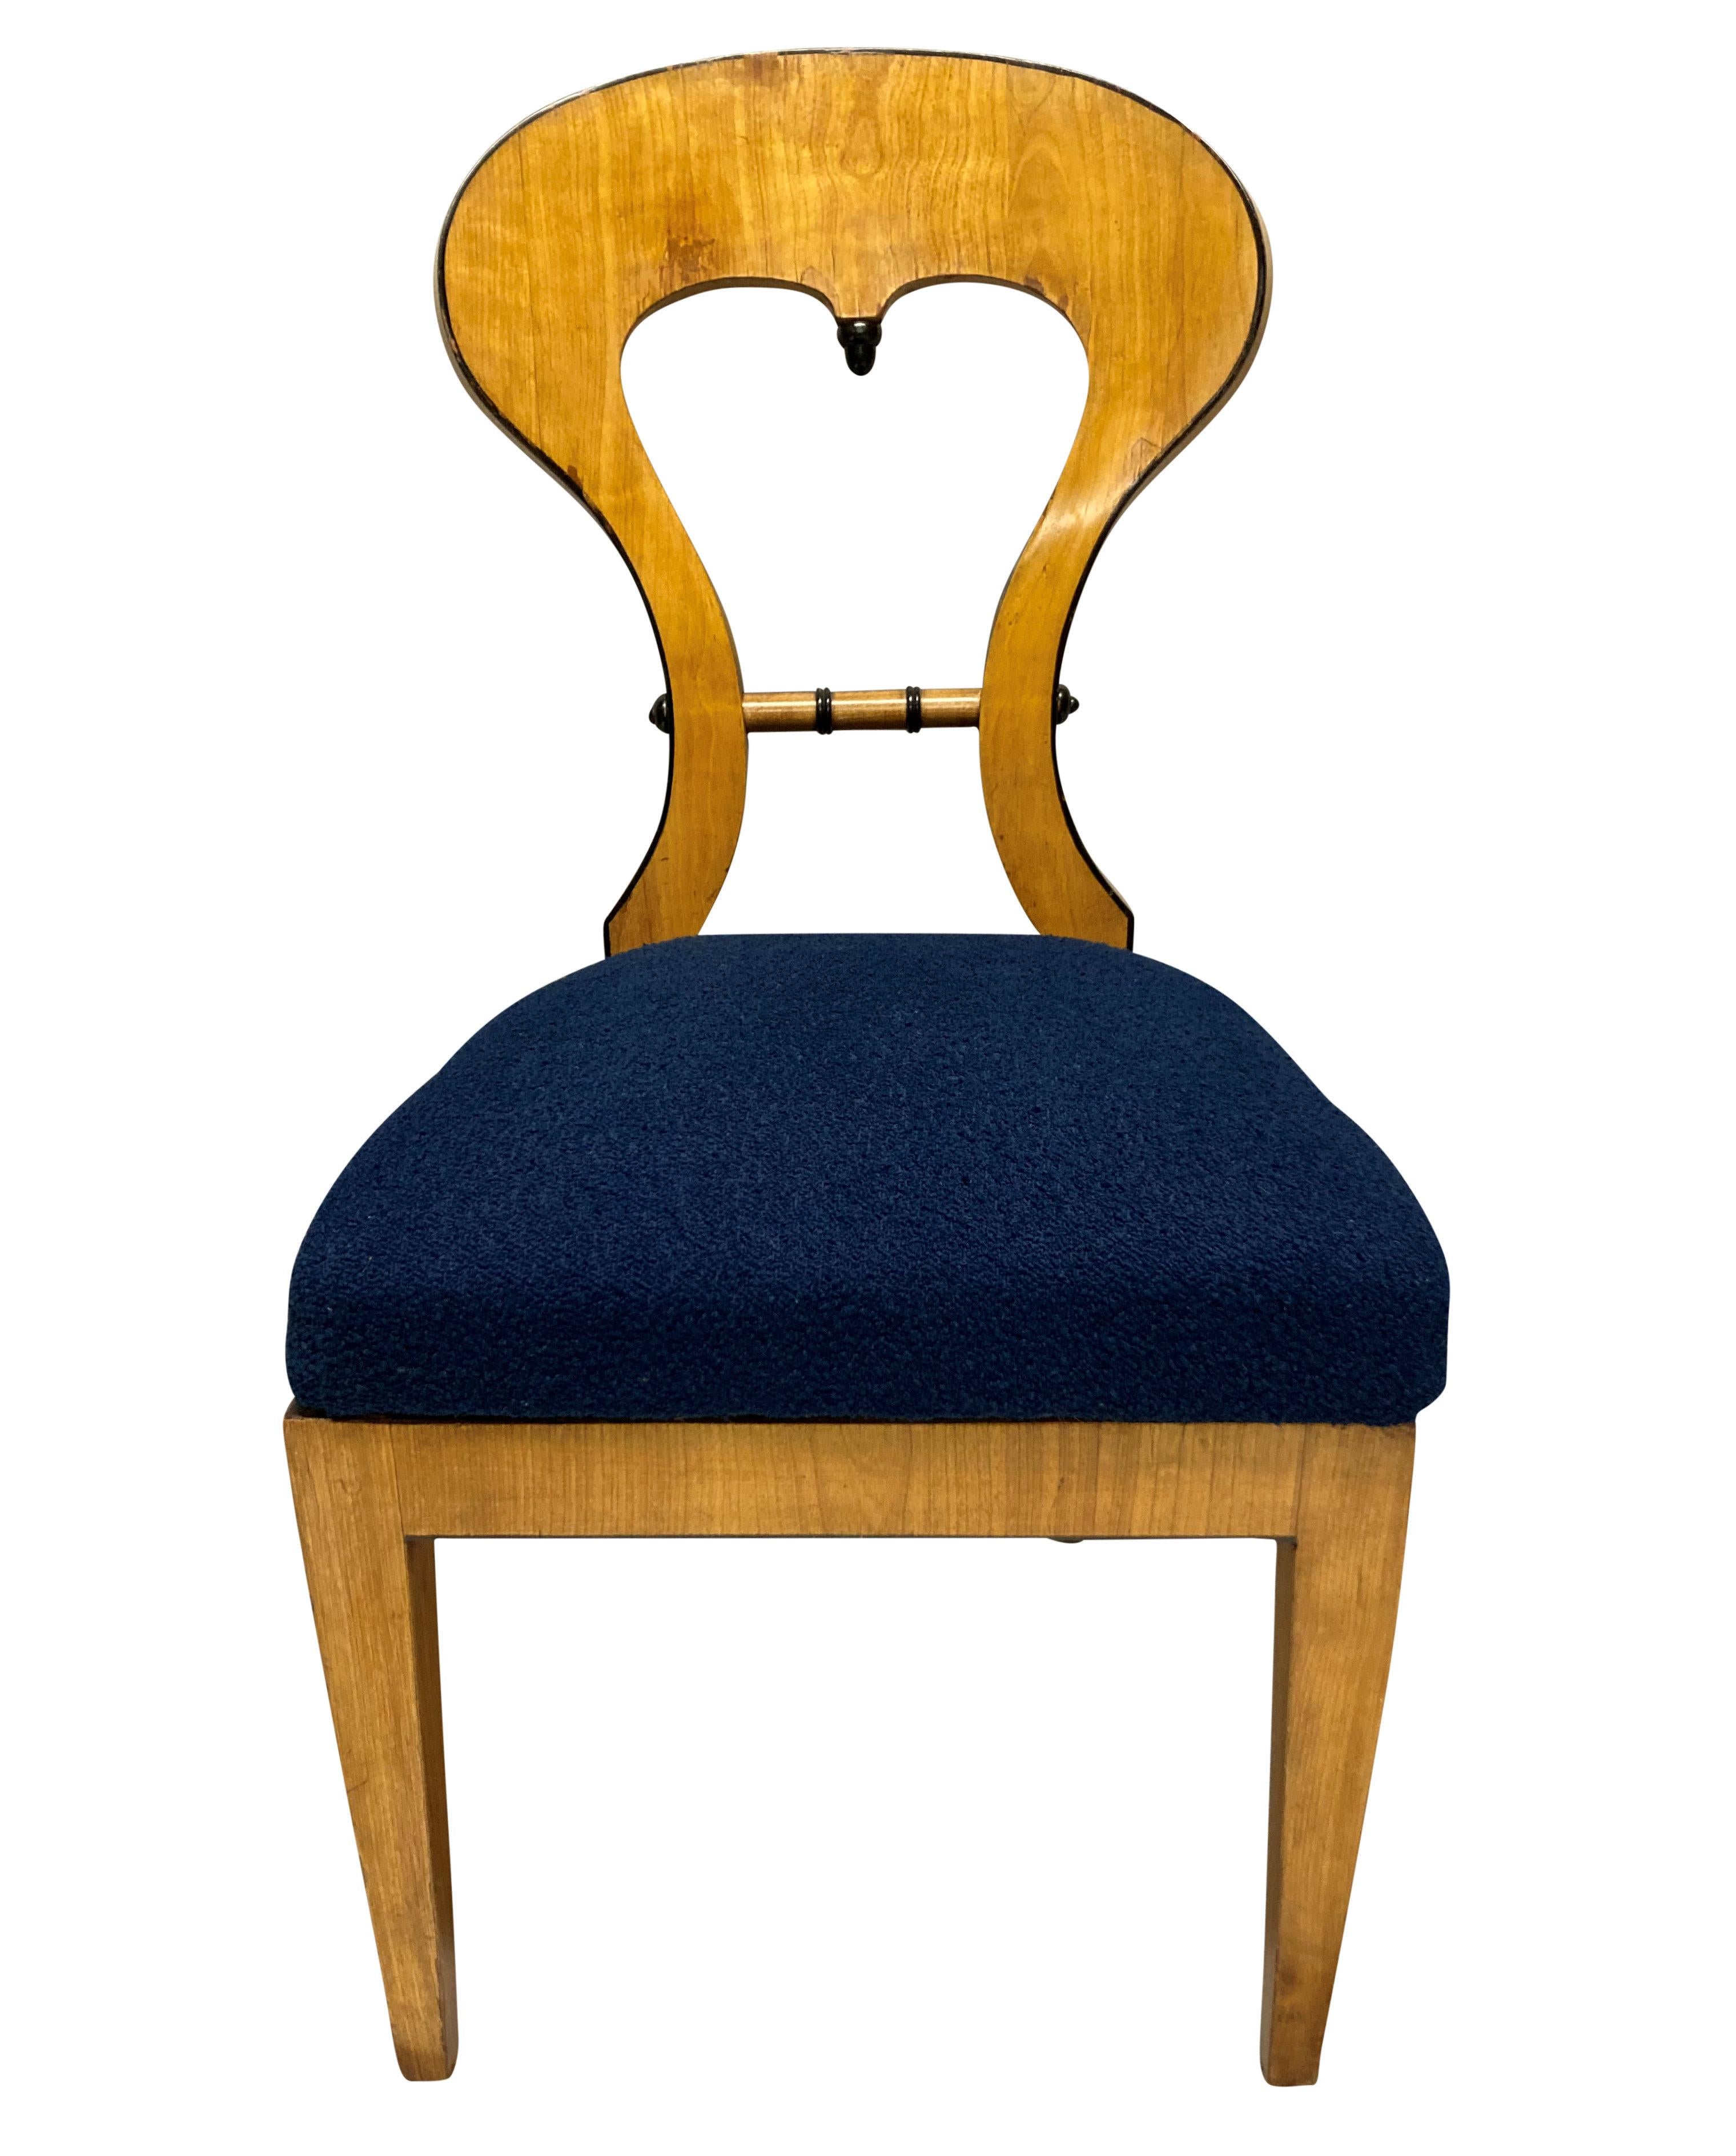 A set of four Austrian Biedermeier chairs in satinwood with ebonised detailing. Newly upholstered in blue boucle.